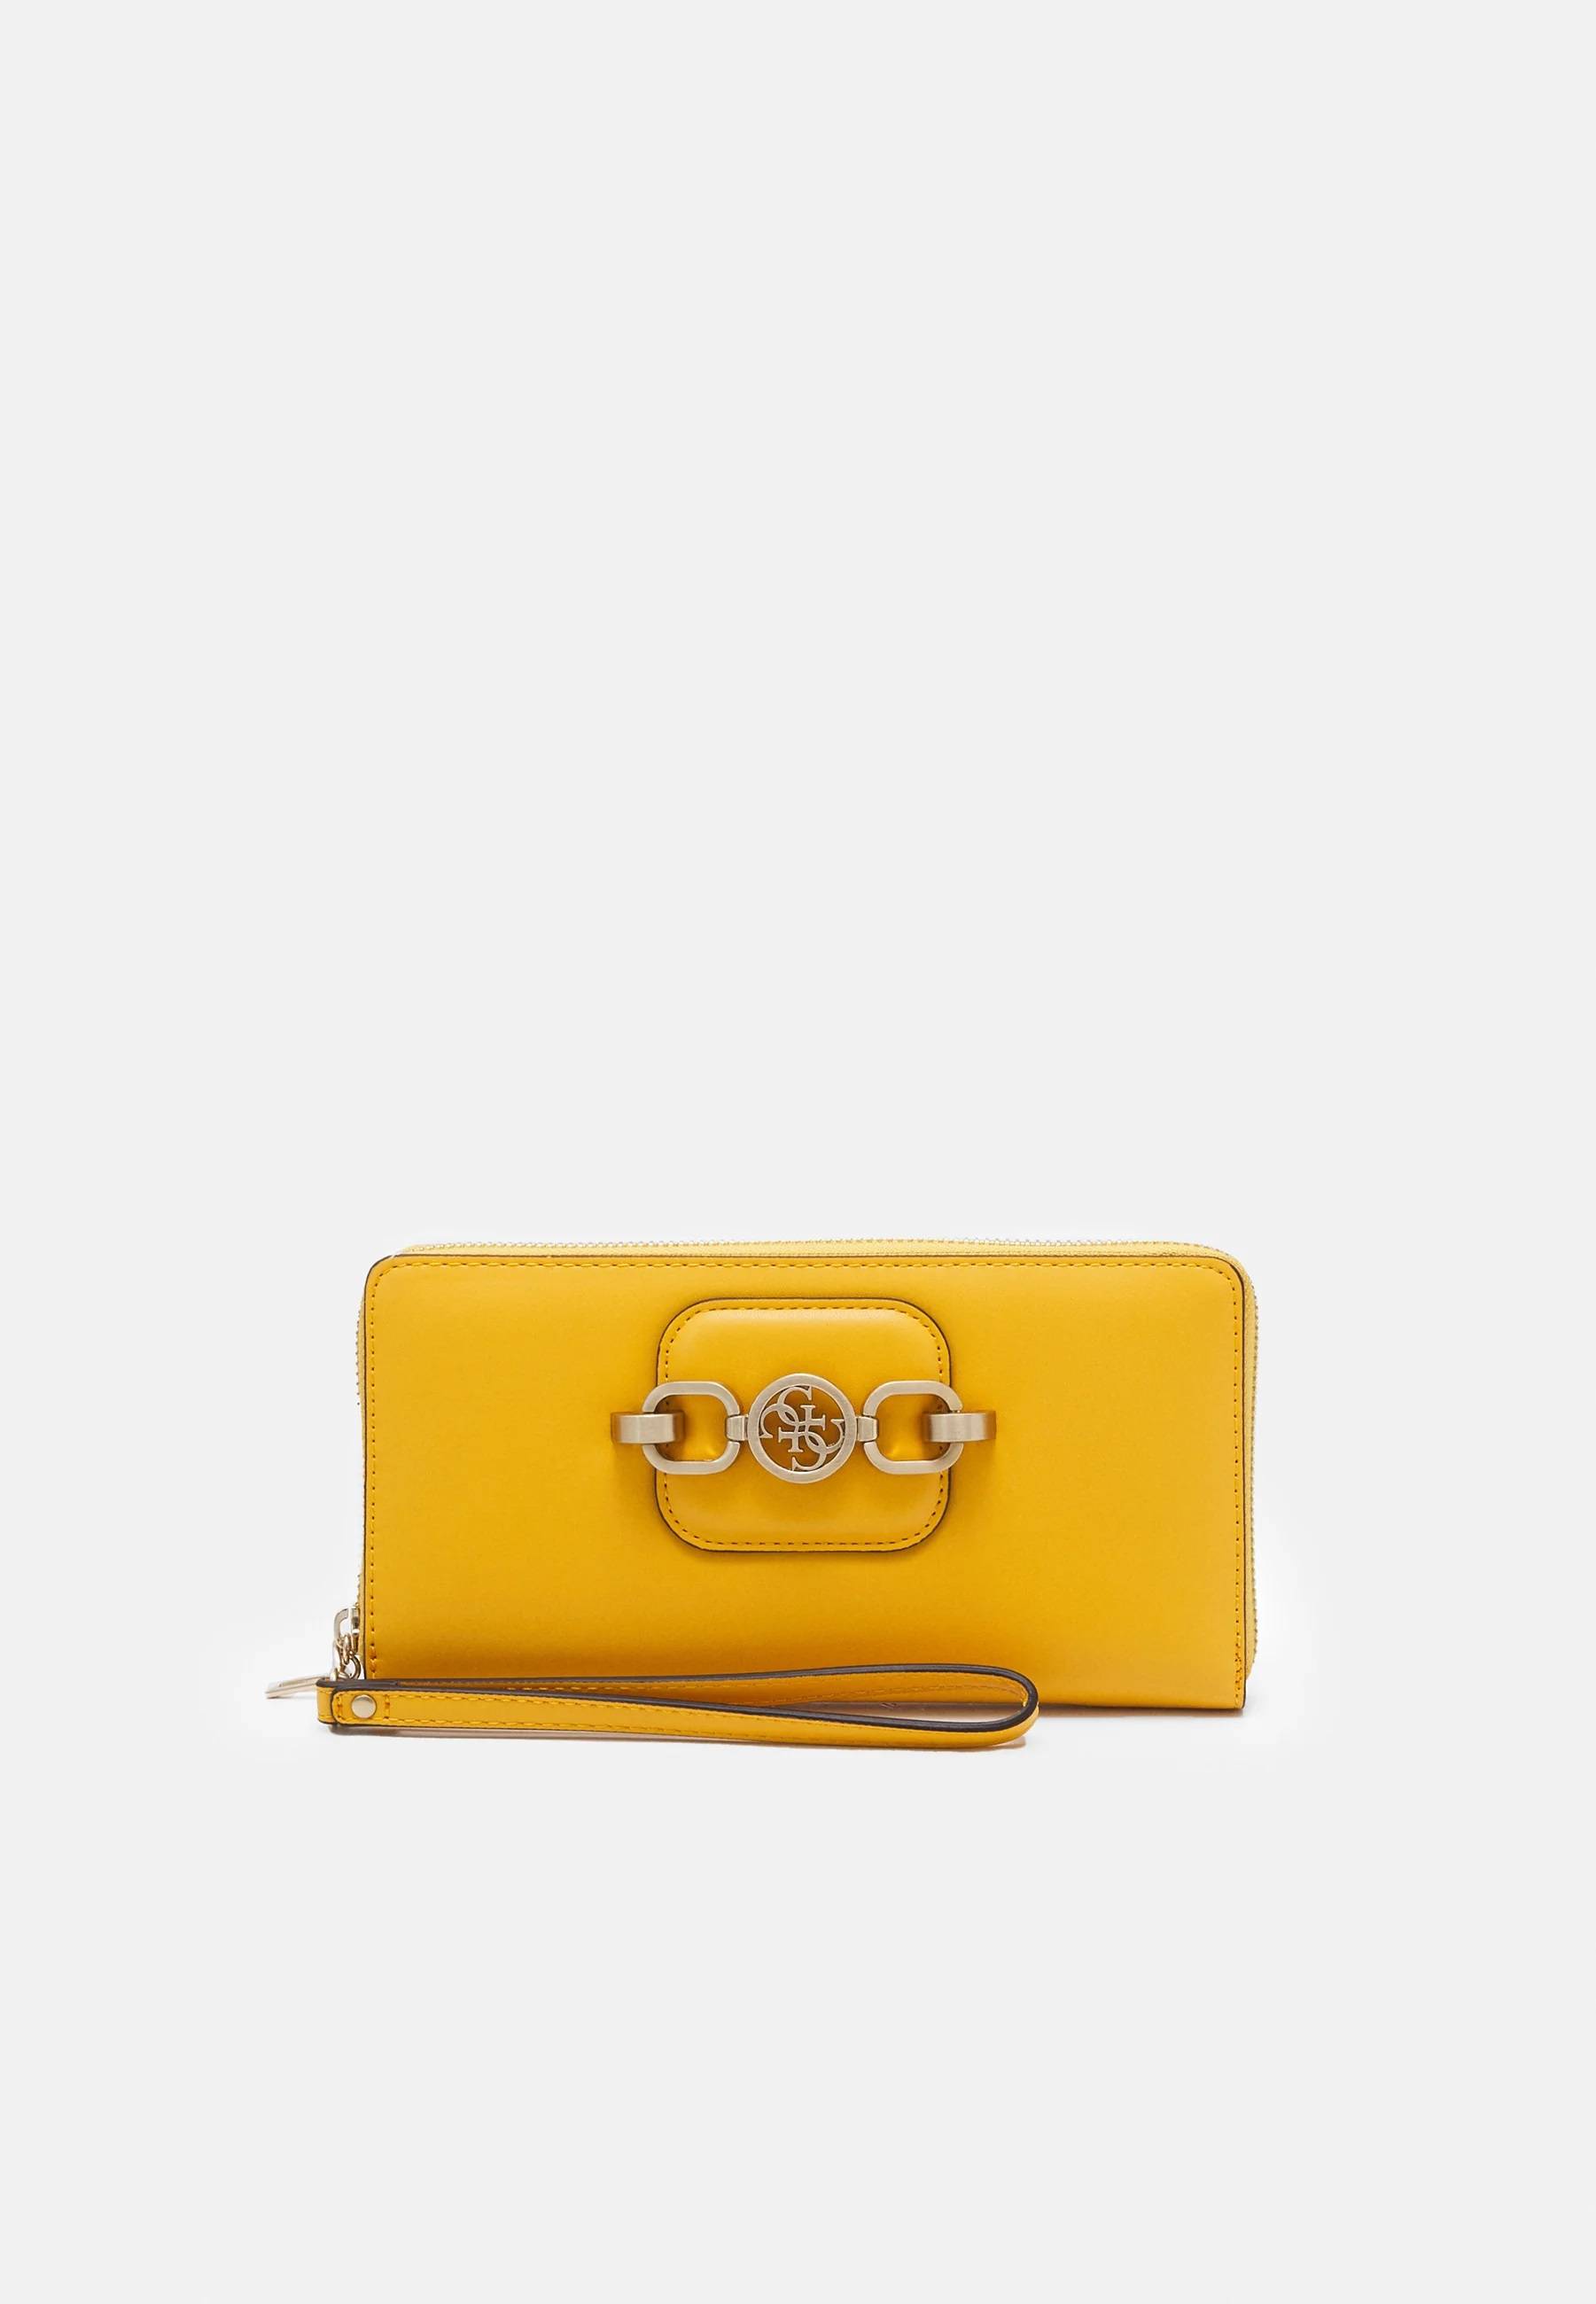 GUESS portefeuille Hensely jaune - All In Bag